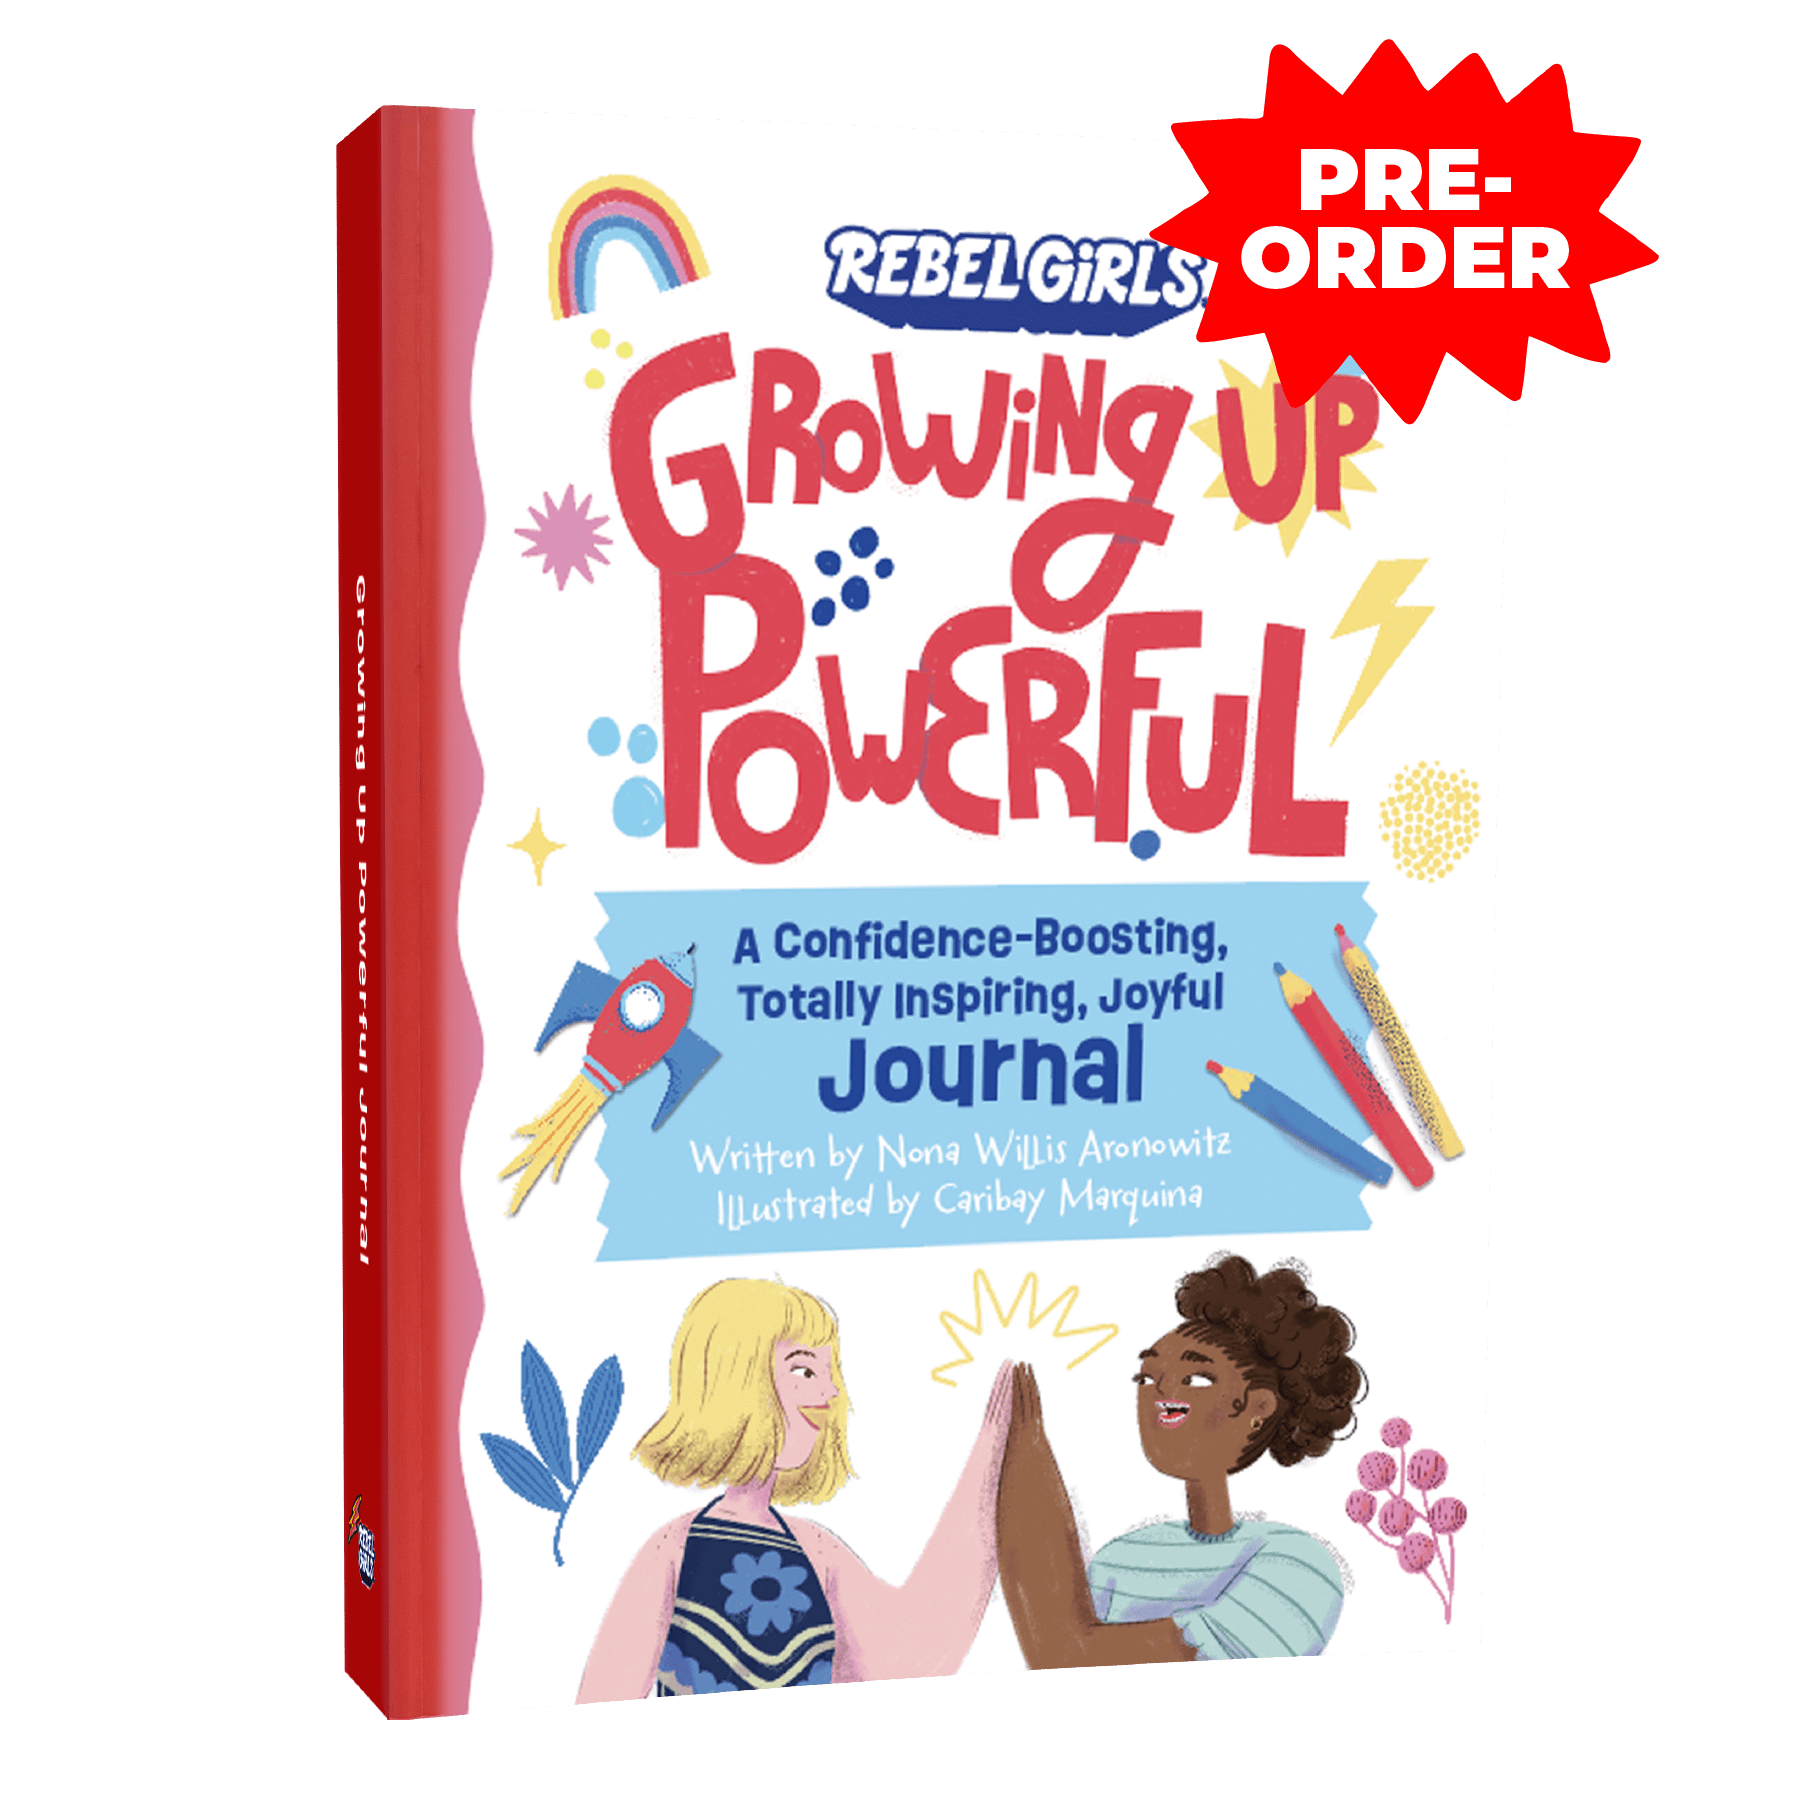 Growing Up Powerful Journal